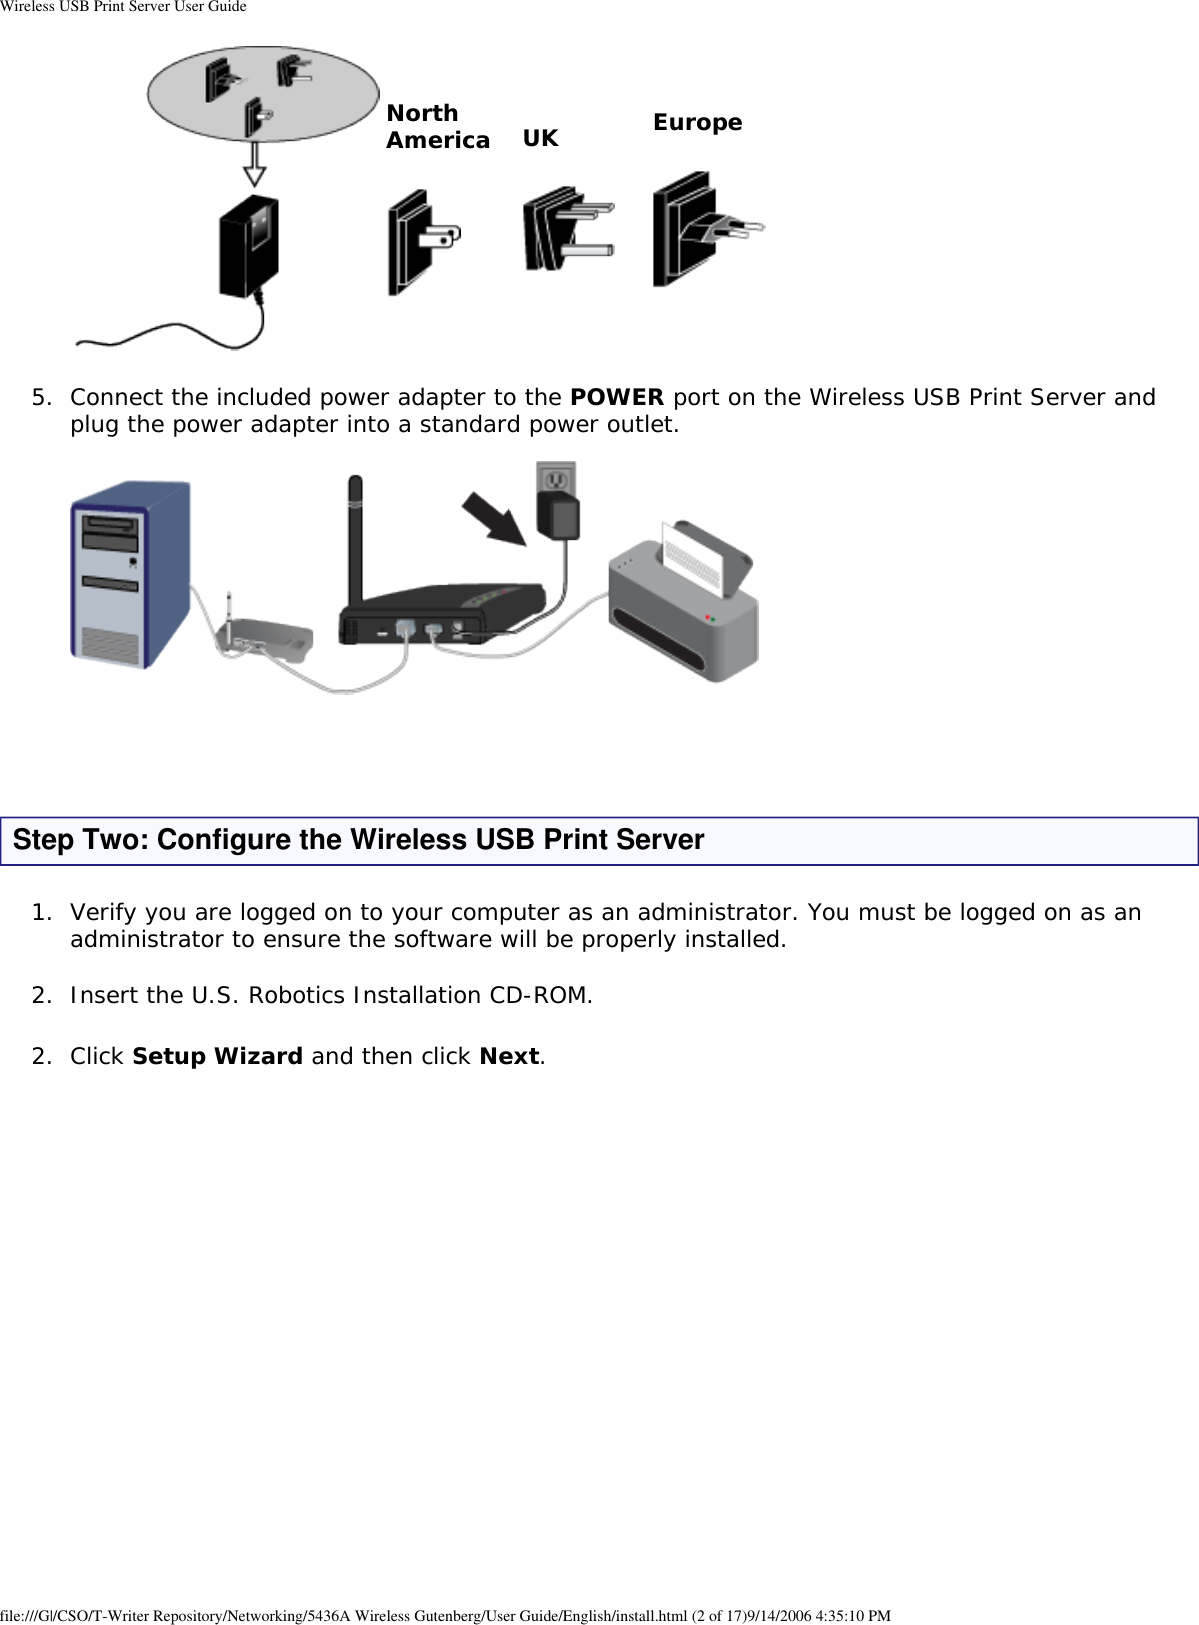 Wireless USB Print Server User GuideNorth America UK Europe5.  Connect the included power adapter to the POWER port on the Wireless USB Print Server and plug the power adapter into a standard power outlet.     Step Two: Configure the Wireless USB Print Server1.  Verify you are logged on to your computer as an administrator. You must be logged on as an administrator to ensure the software will be properly installed. 2.  Insert the U.S. Robotics Installation CD-ROM. 2.  Click Setup Wizard and then click Next.  file:///G|/CSO/T-Writer Repository/Networking/5436A Wireless Gutenberg/User Guide/English/install.html (2 of 17)9/14/2006 4:35:10 PM